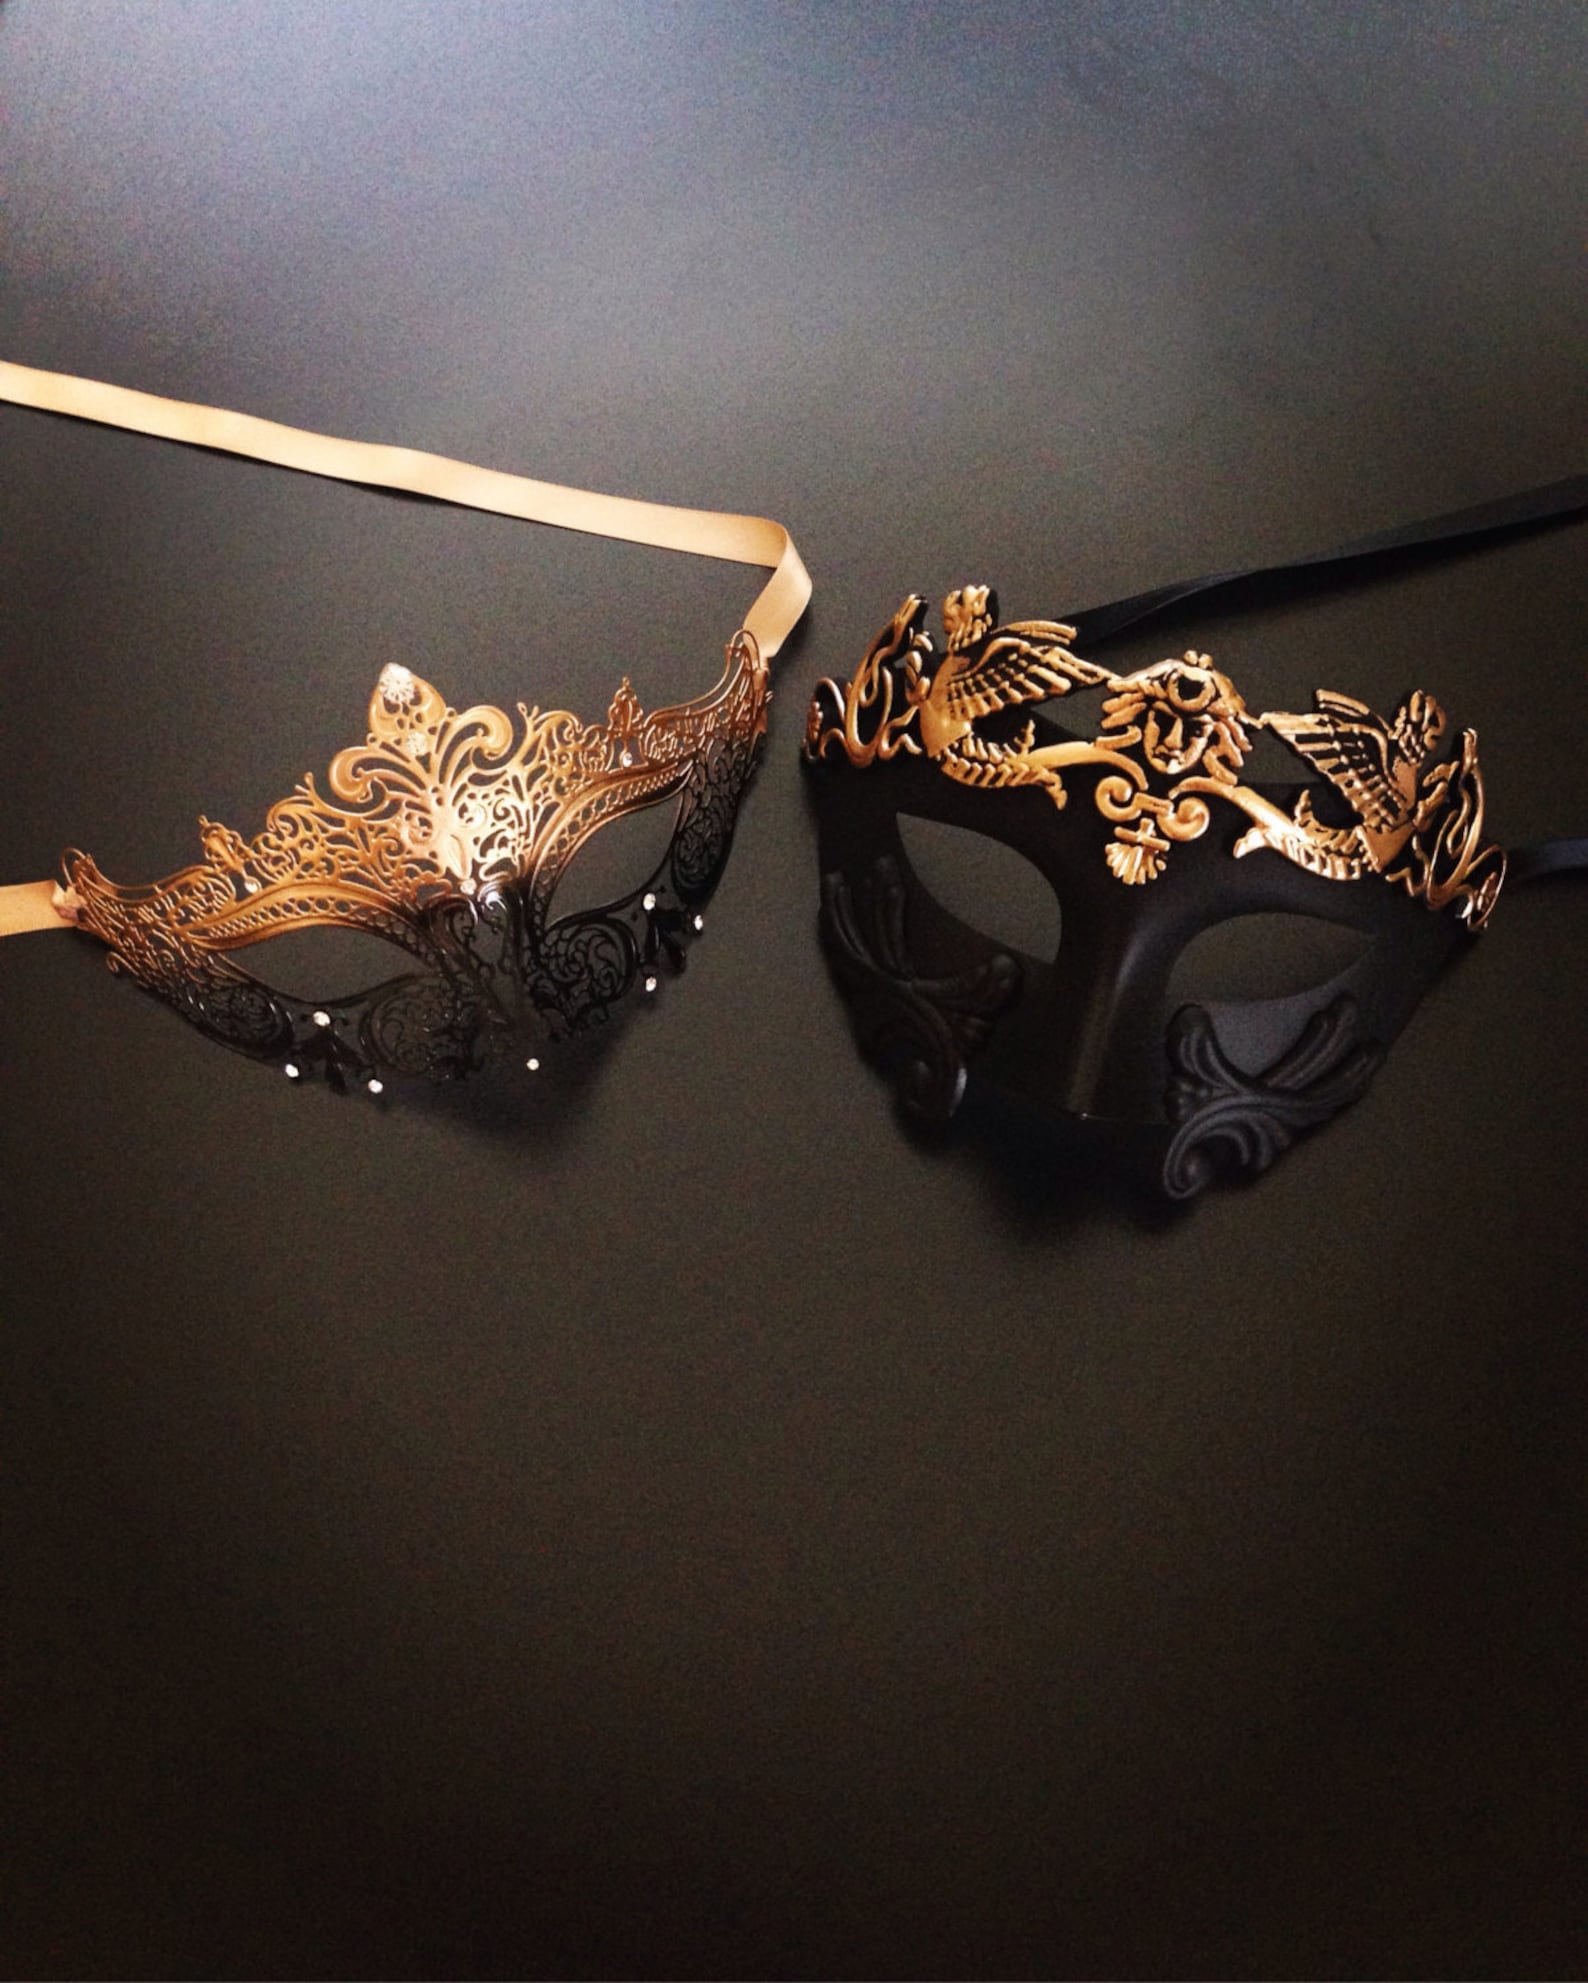 Couples masquerade masks in venetian style in gold and black for sale.